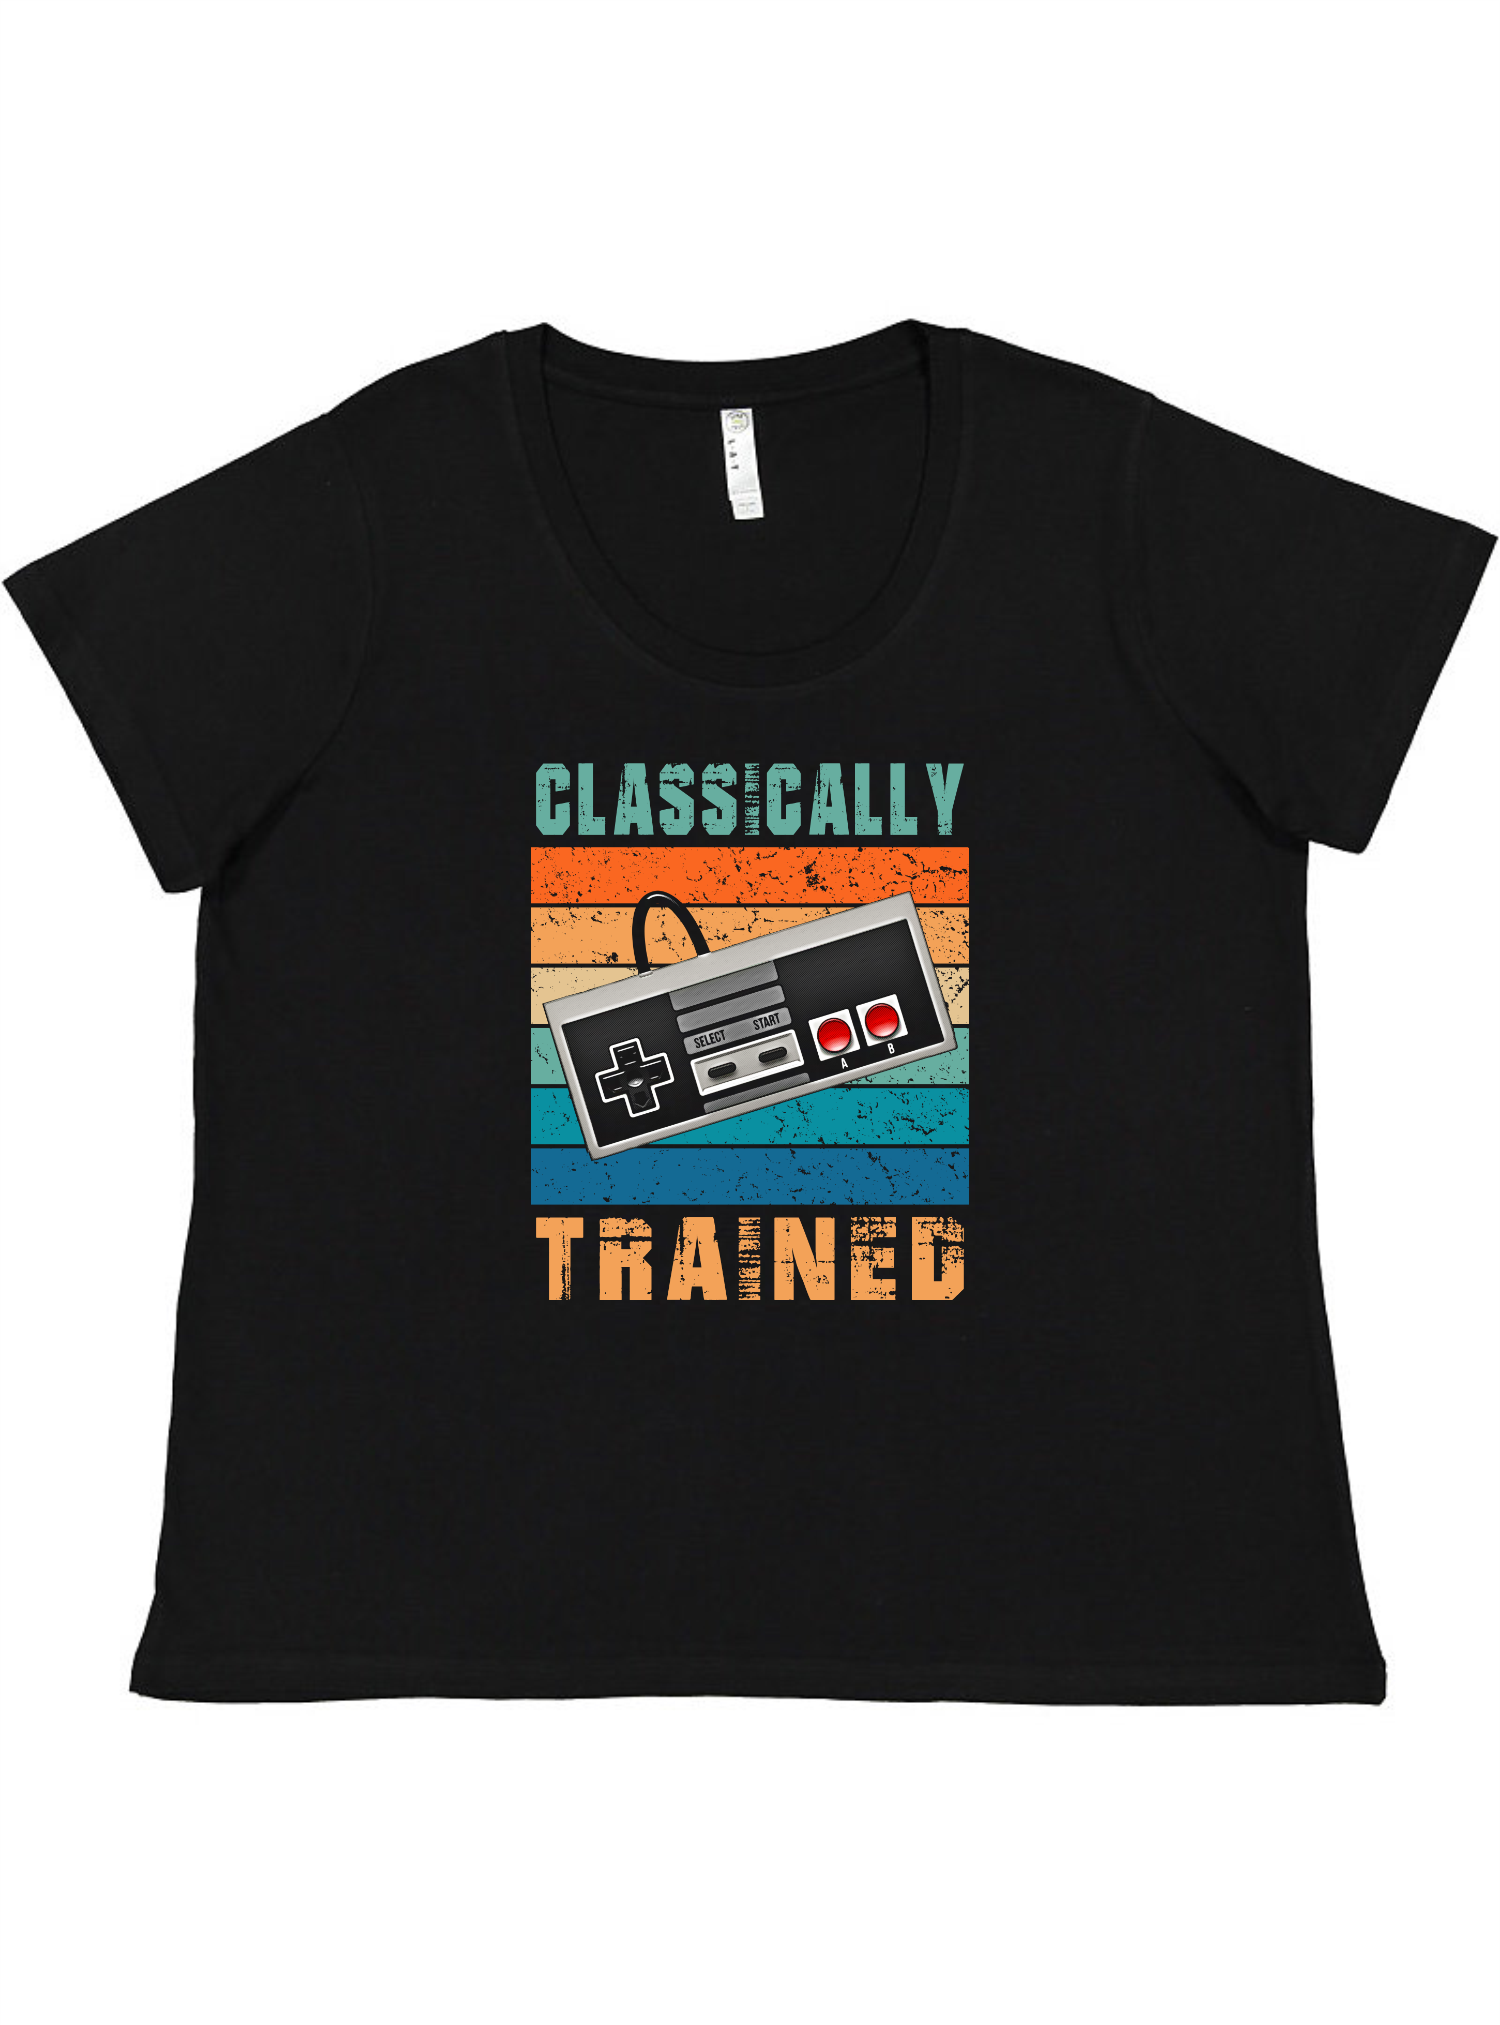 Classically Trained Ladies Tee Ladies Shirt by Akron Pride Custom Tees | Akron Pride Custom Tees